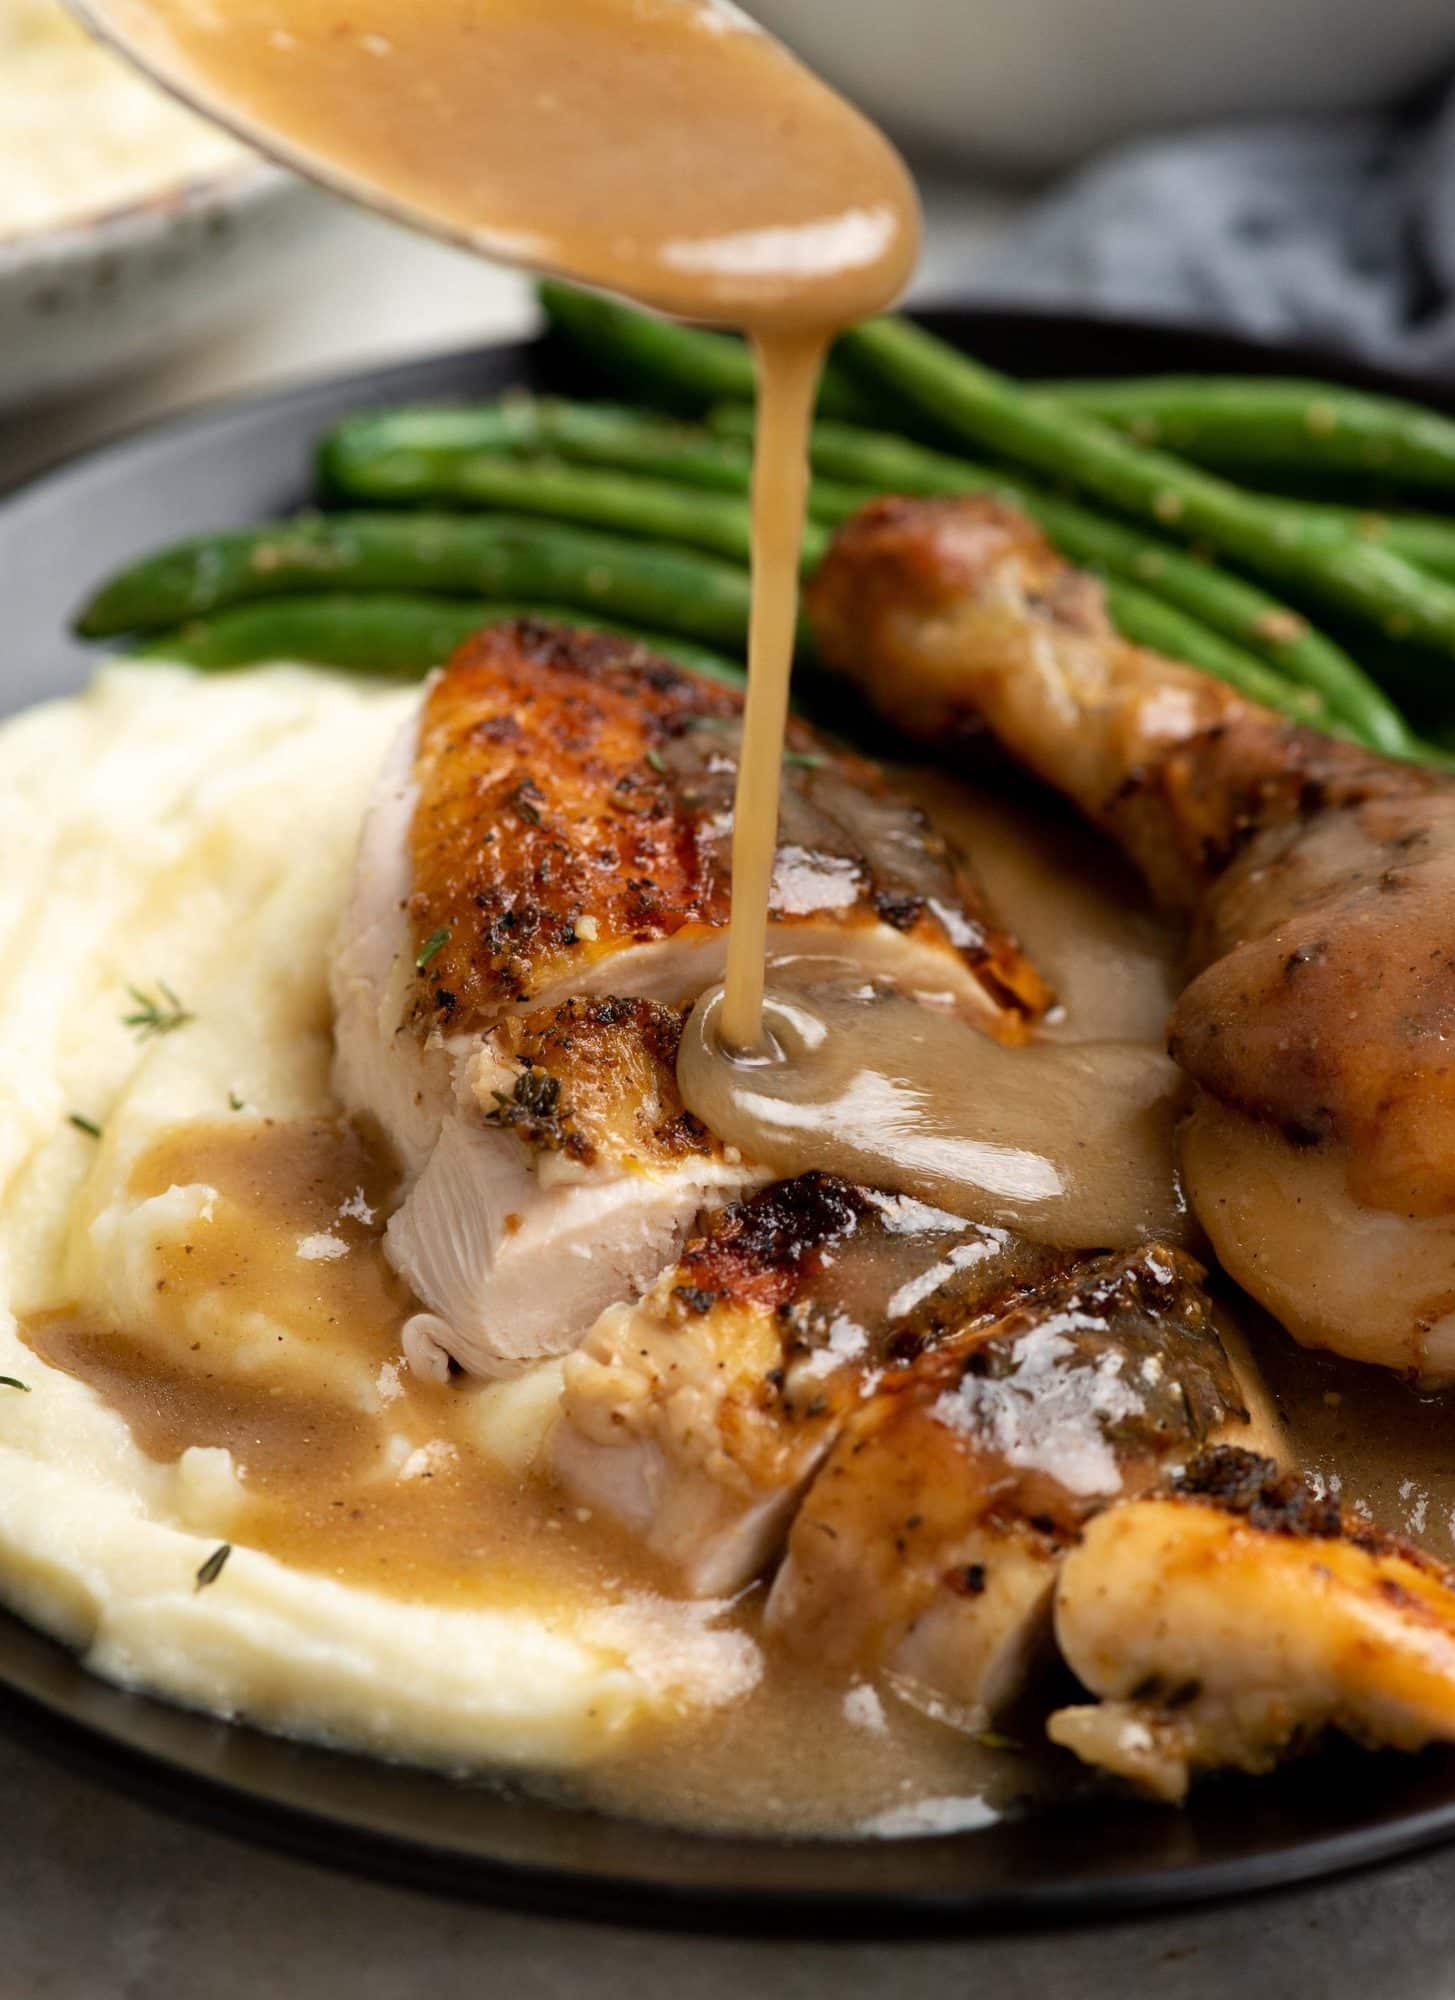 Picture of pouring gravy on a slice of roast chicken with mashed potatoes and green beans on a black plate.